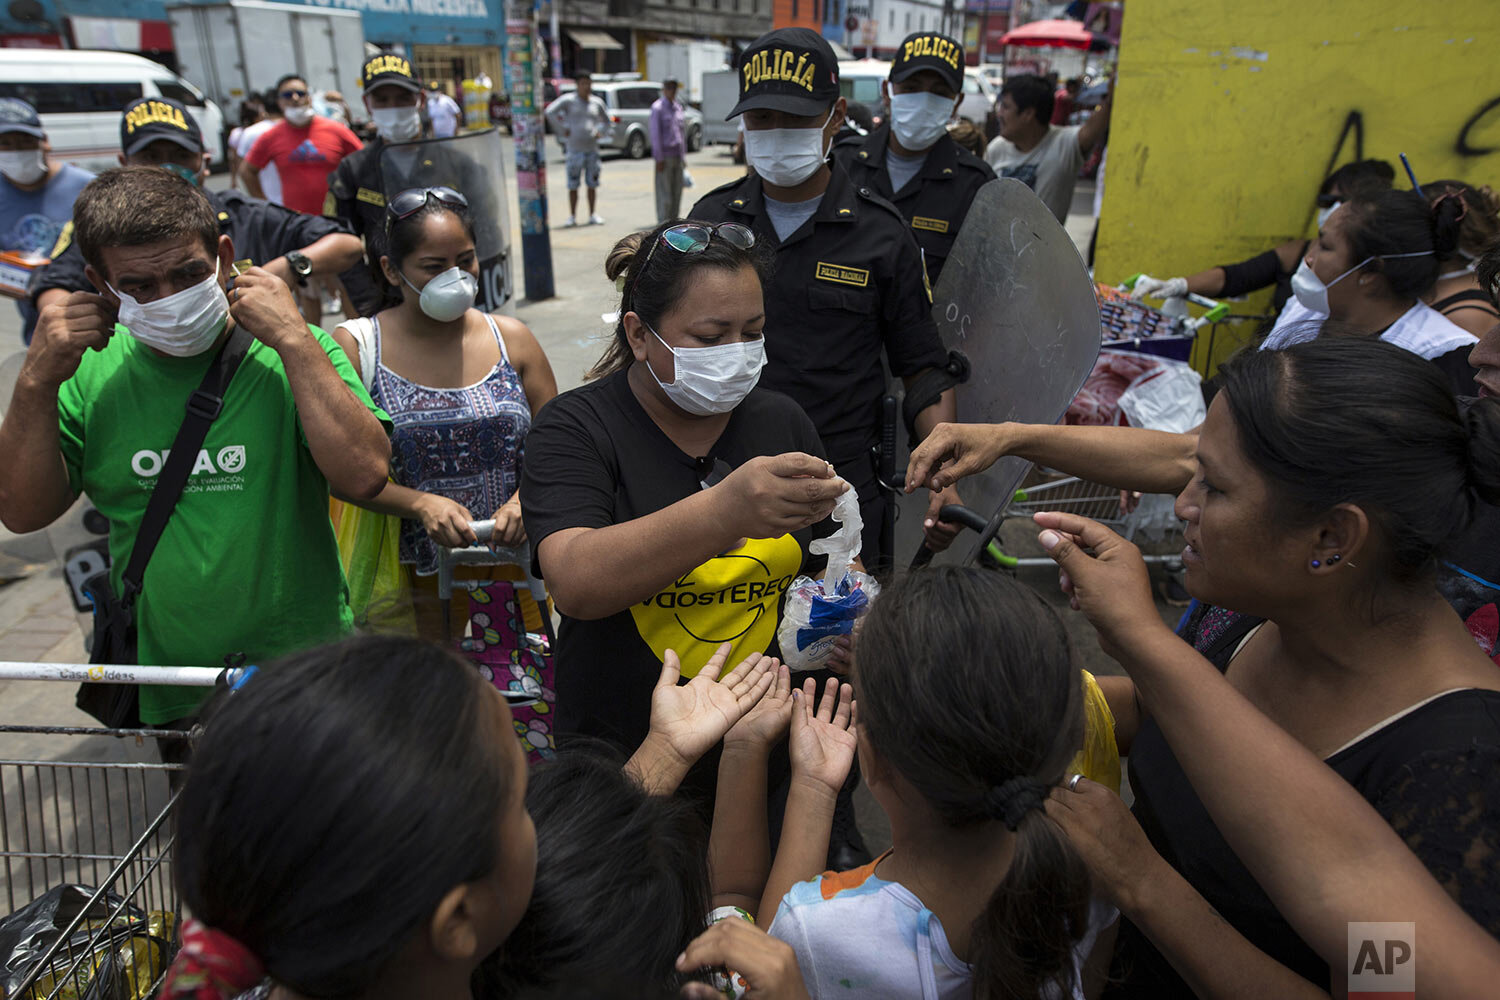  In this March 19, 2020 photo, Cesar Alegre, far left, and fellow residents who share a sprawling rundown house, receive free protective gear to help curb the spread of the new coronavirus, outside a popular food market in Lima, Peru. (AP Photo/Rodri